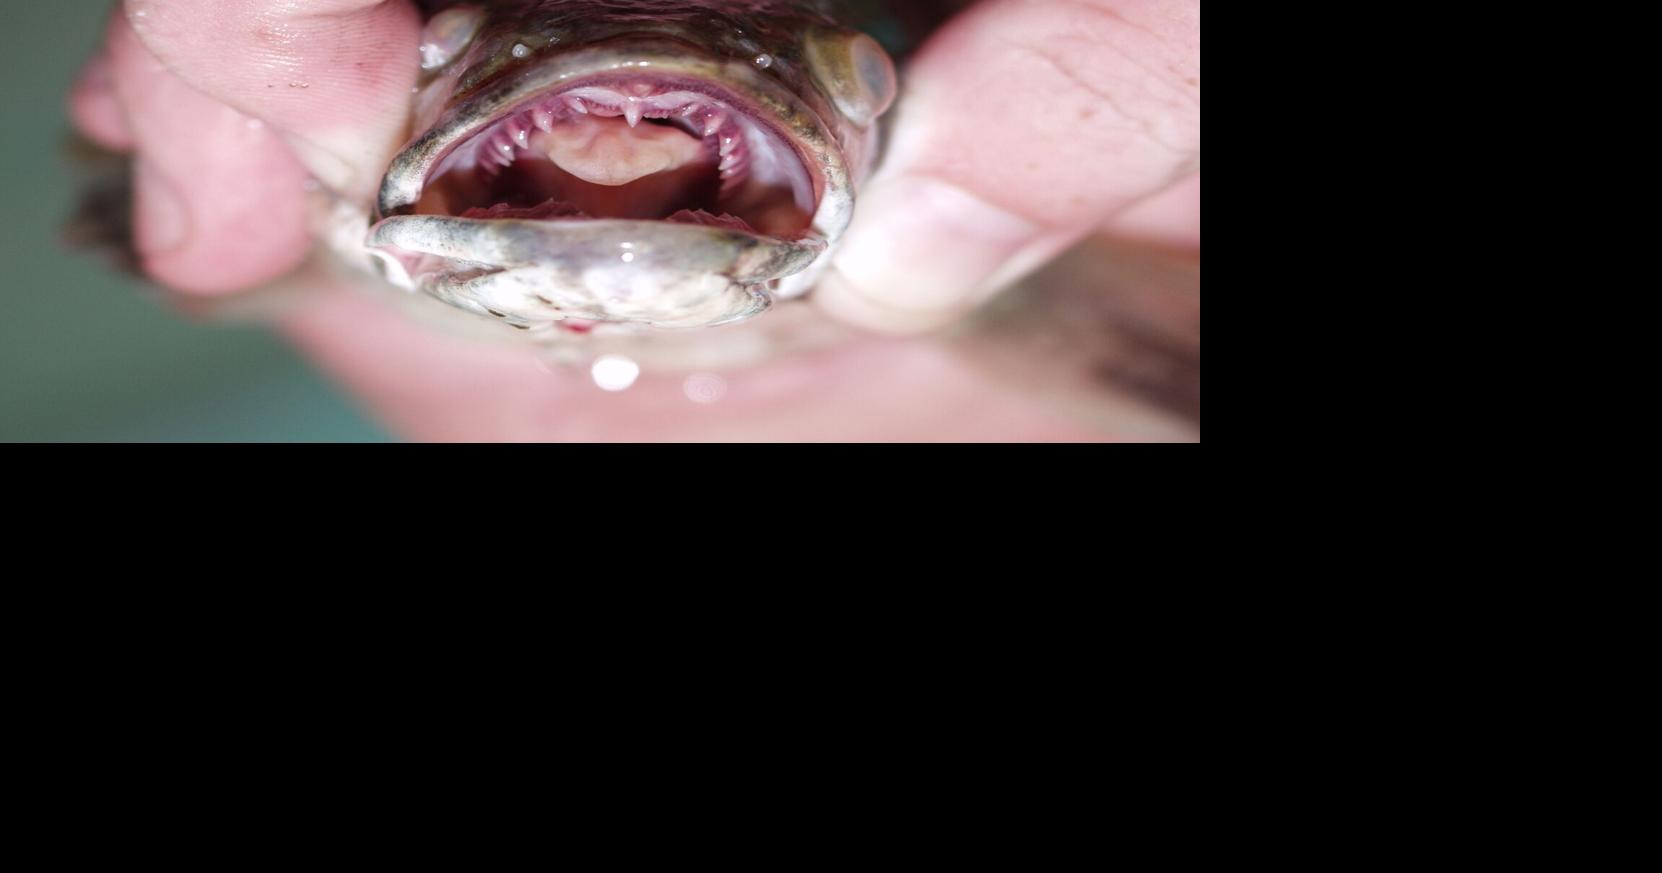 Will Sutton: Snakeheads are nasty predators. I know. I had one.